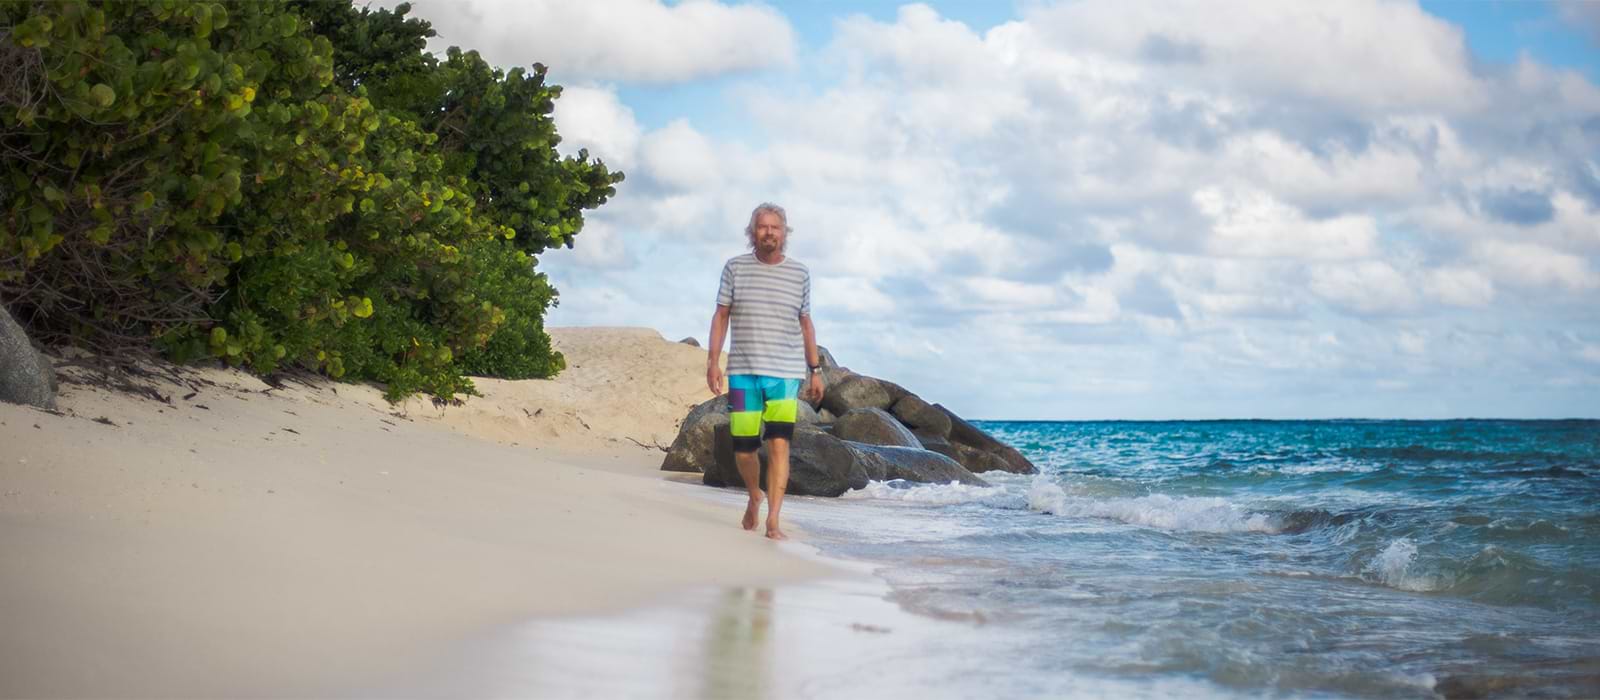 Richard Branson living the Virgin Voyages lifestyle on the beach.